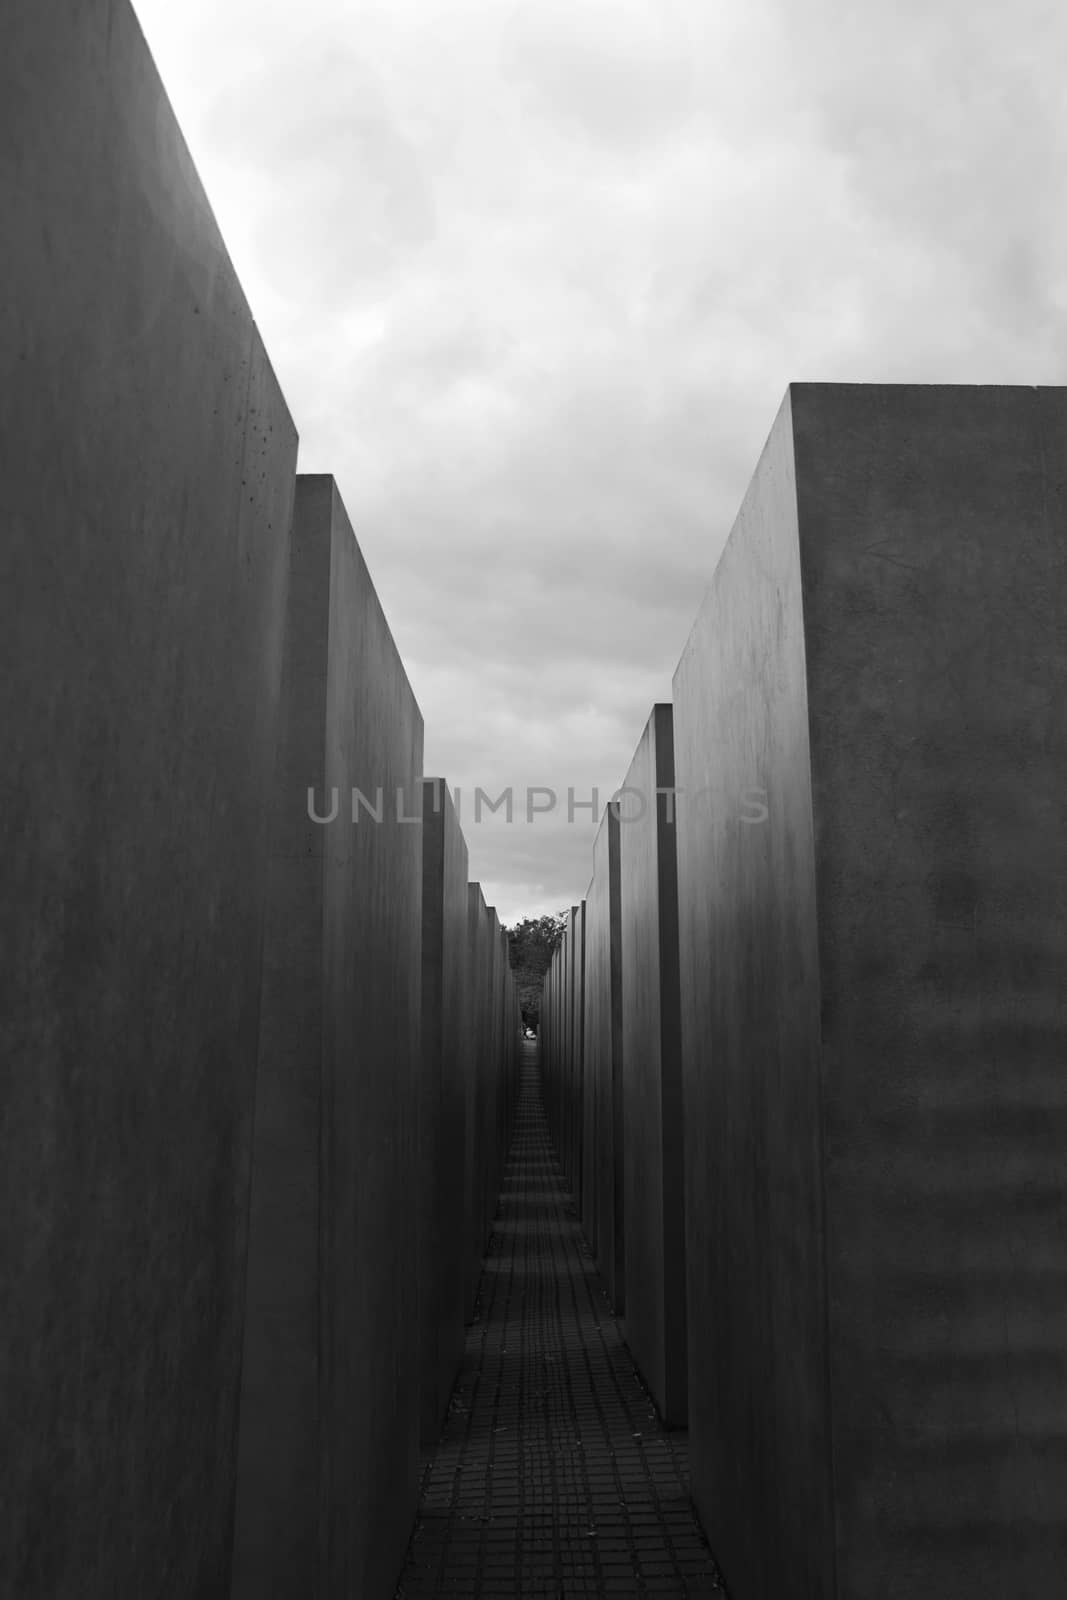 The Memorial to the Murdered Jews of Europe, the Holocaust Memorial,memorial in Berlin, Jewish victims, Holocaust. by Taidundua